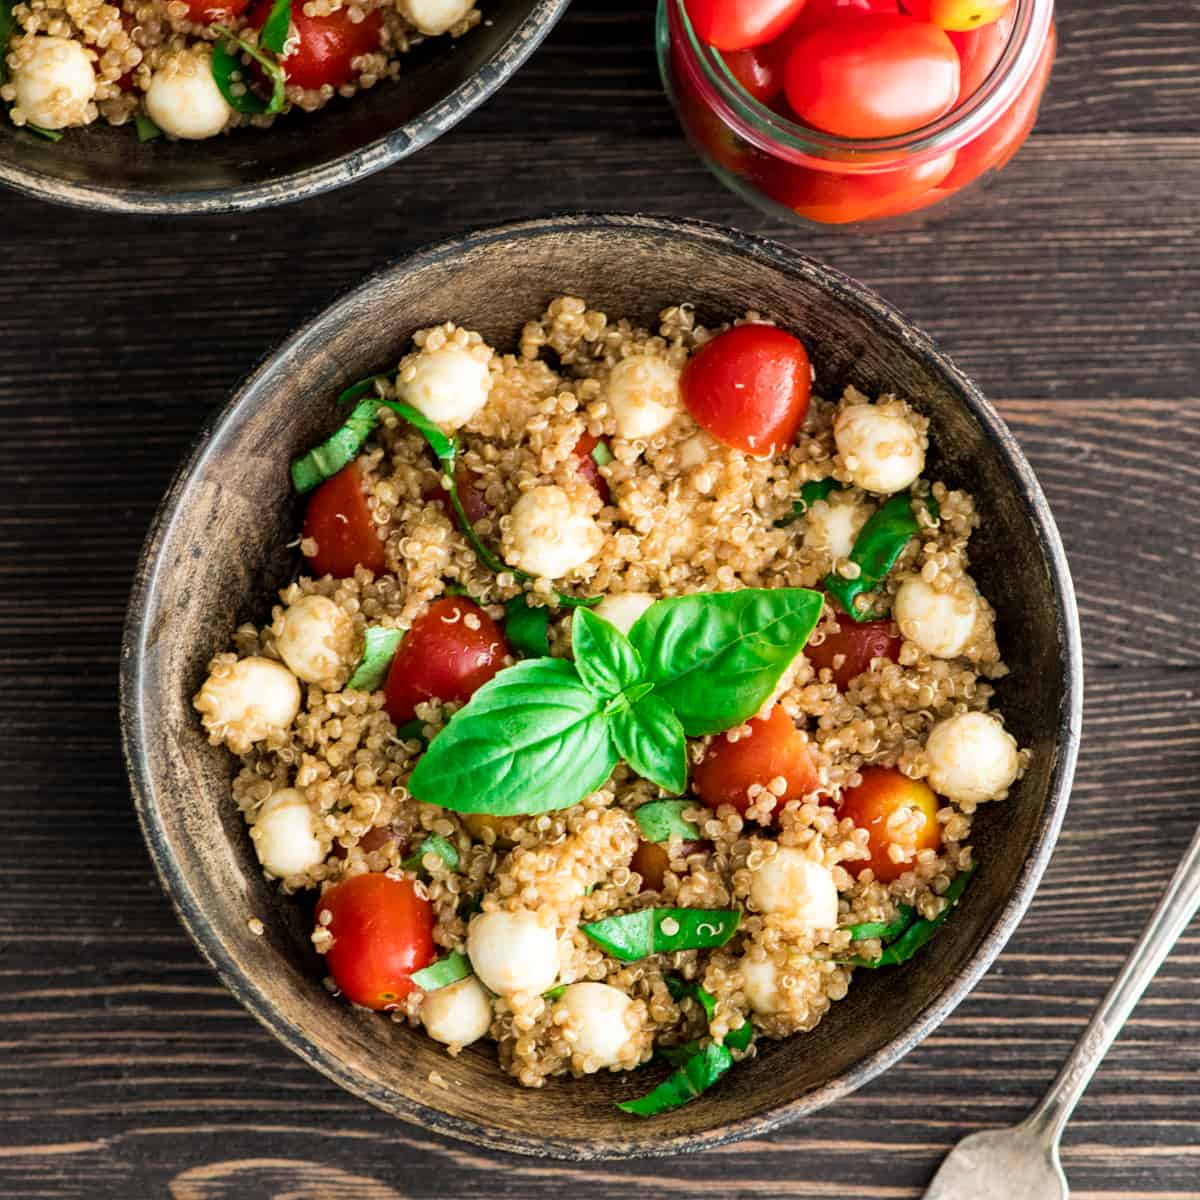 Overhead view of a bowl of Balsamic Caprese Quinoa Salad garnished with fresh basil